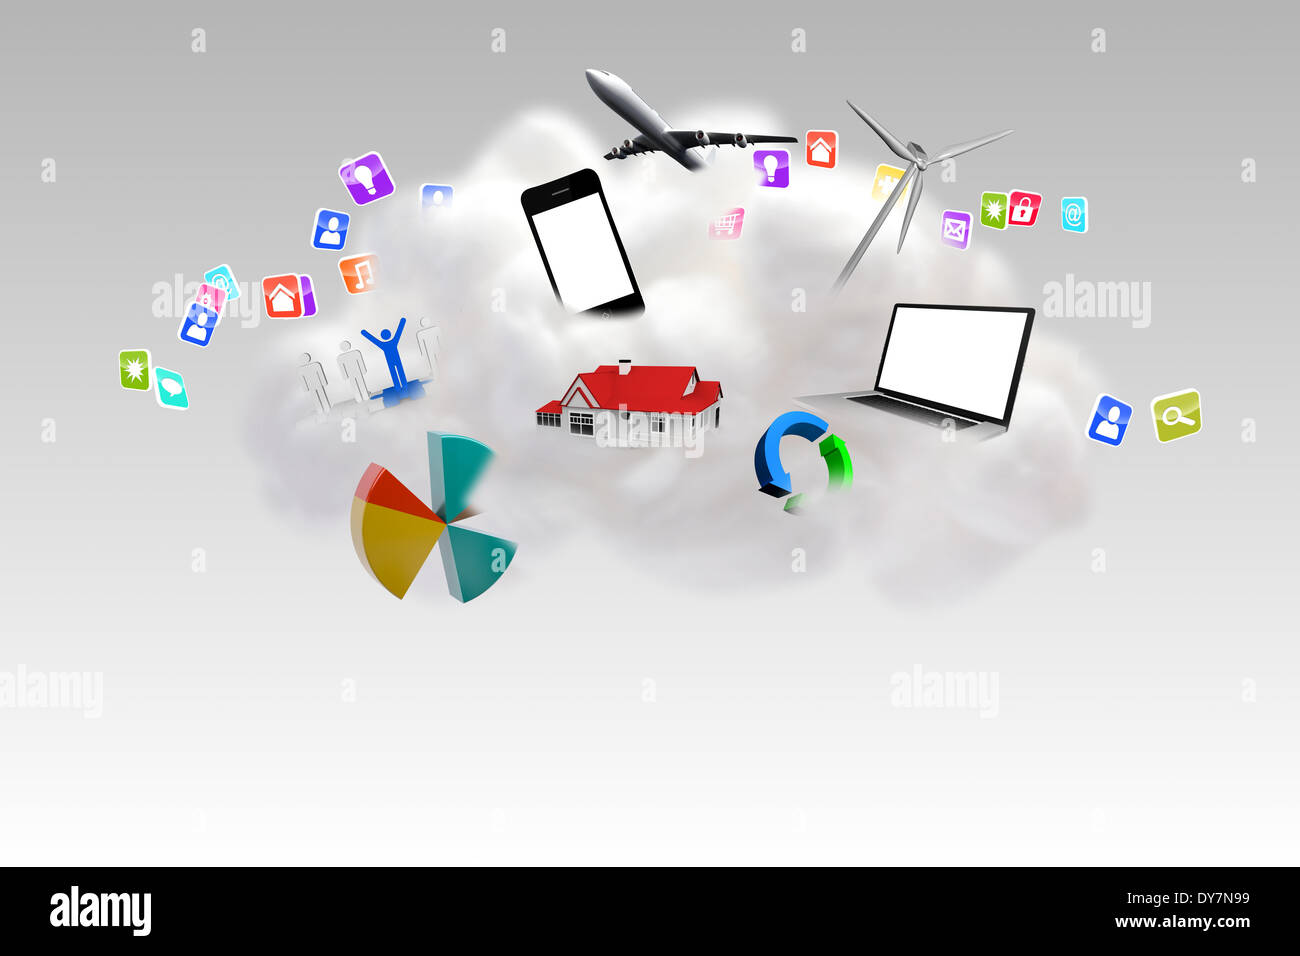 Cloud computing graphic with apps Stock Photo